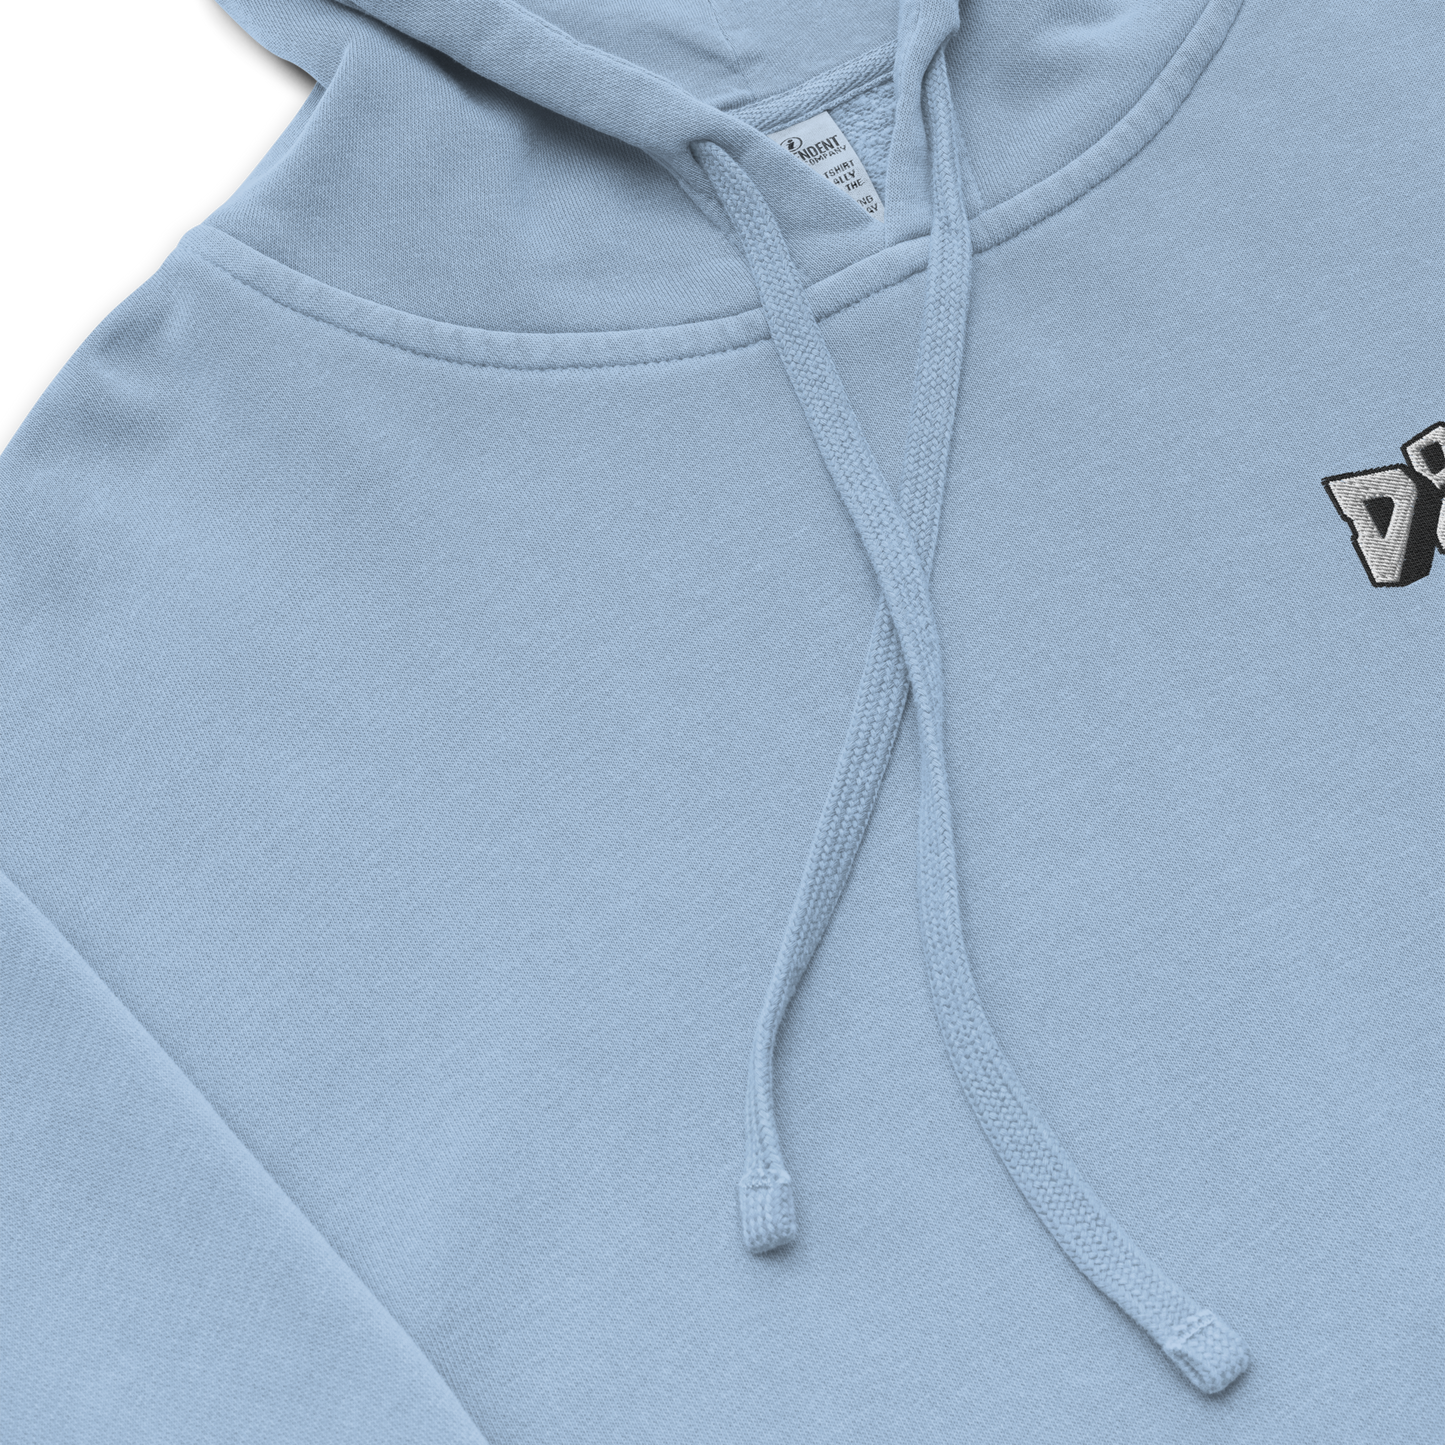 Pigment-Dyed Hoodie - Light Blue